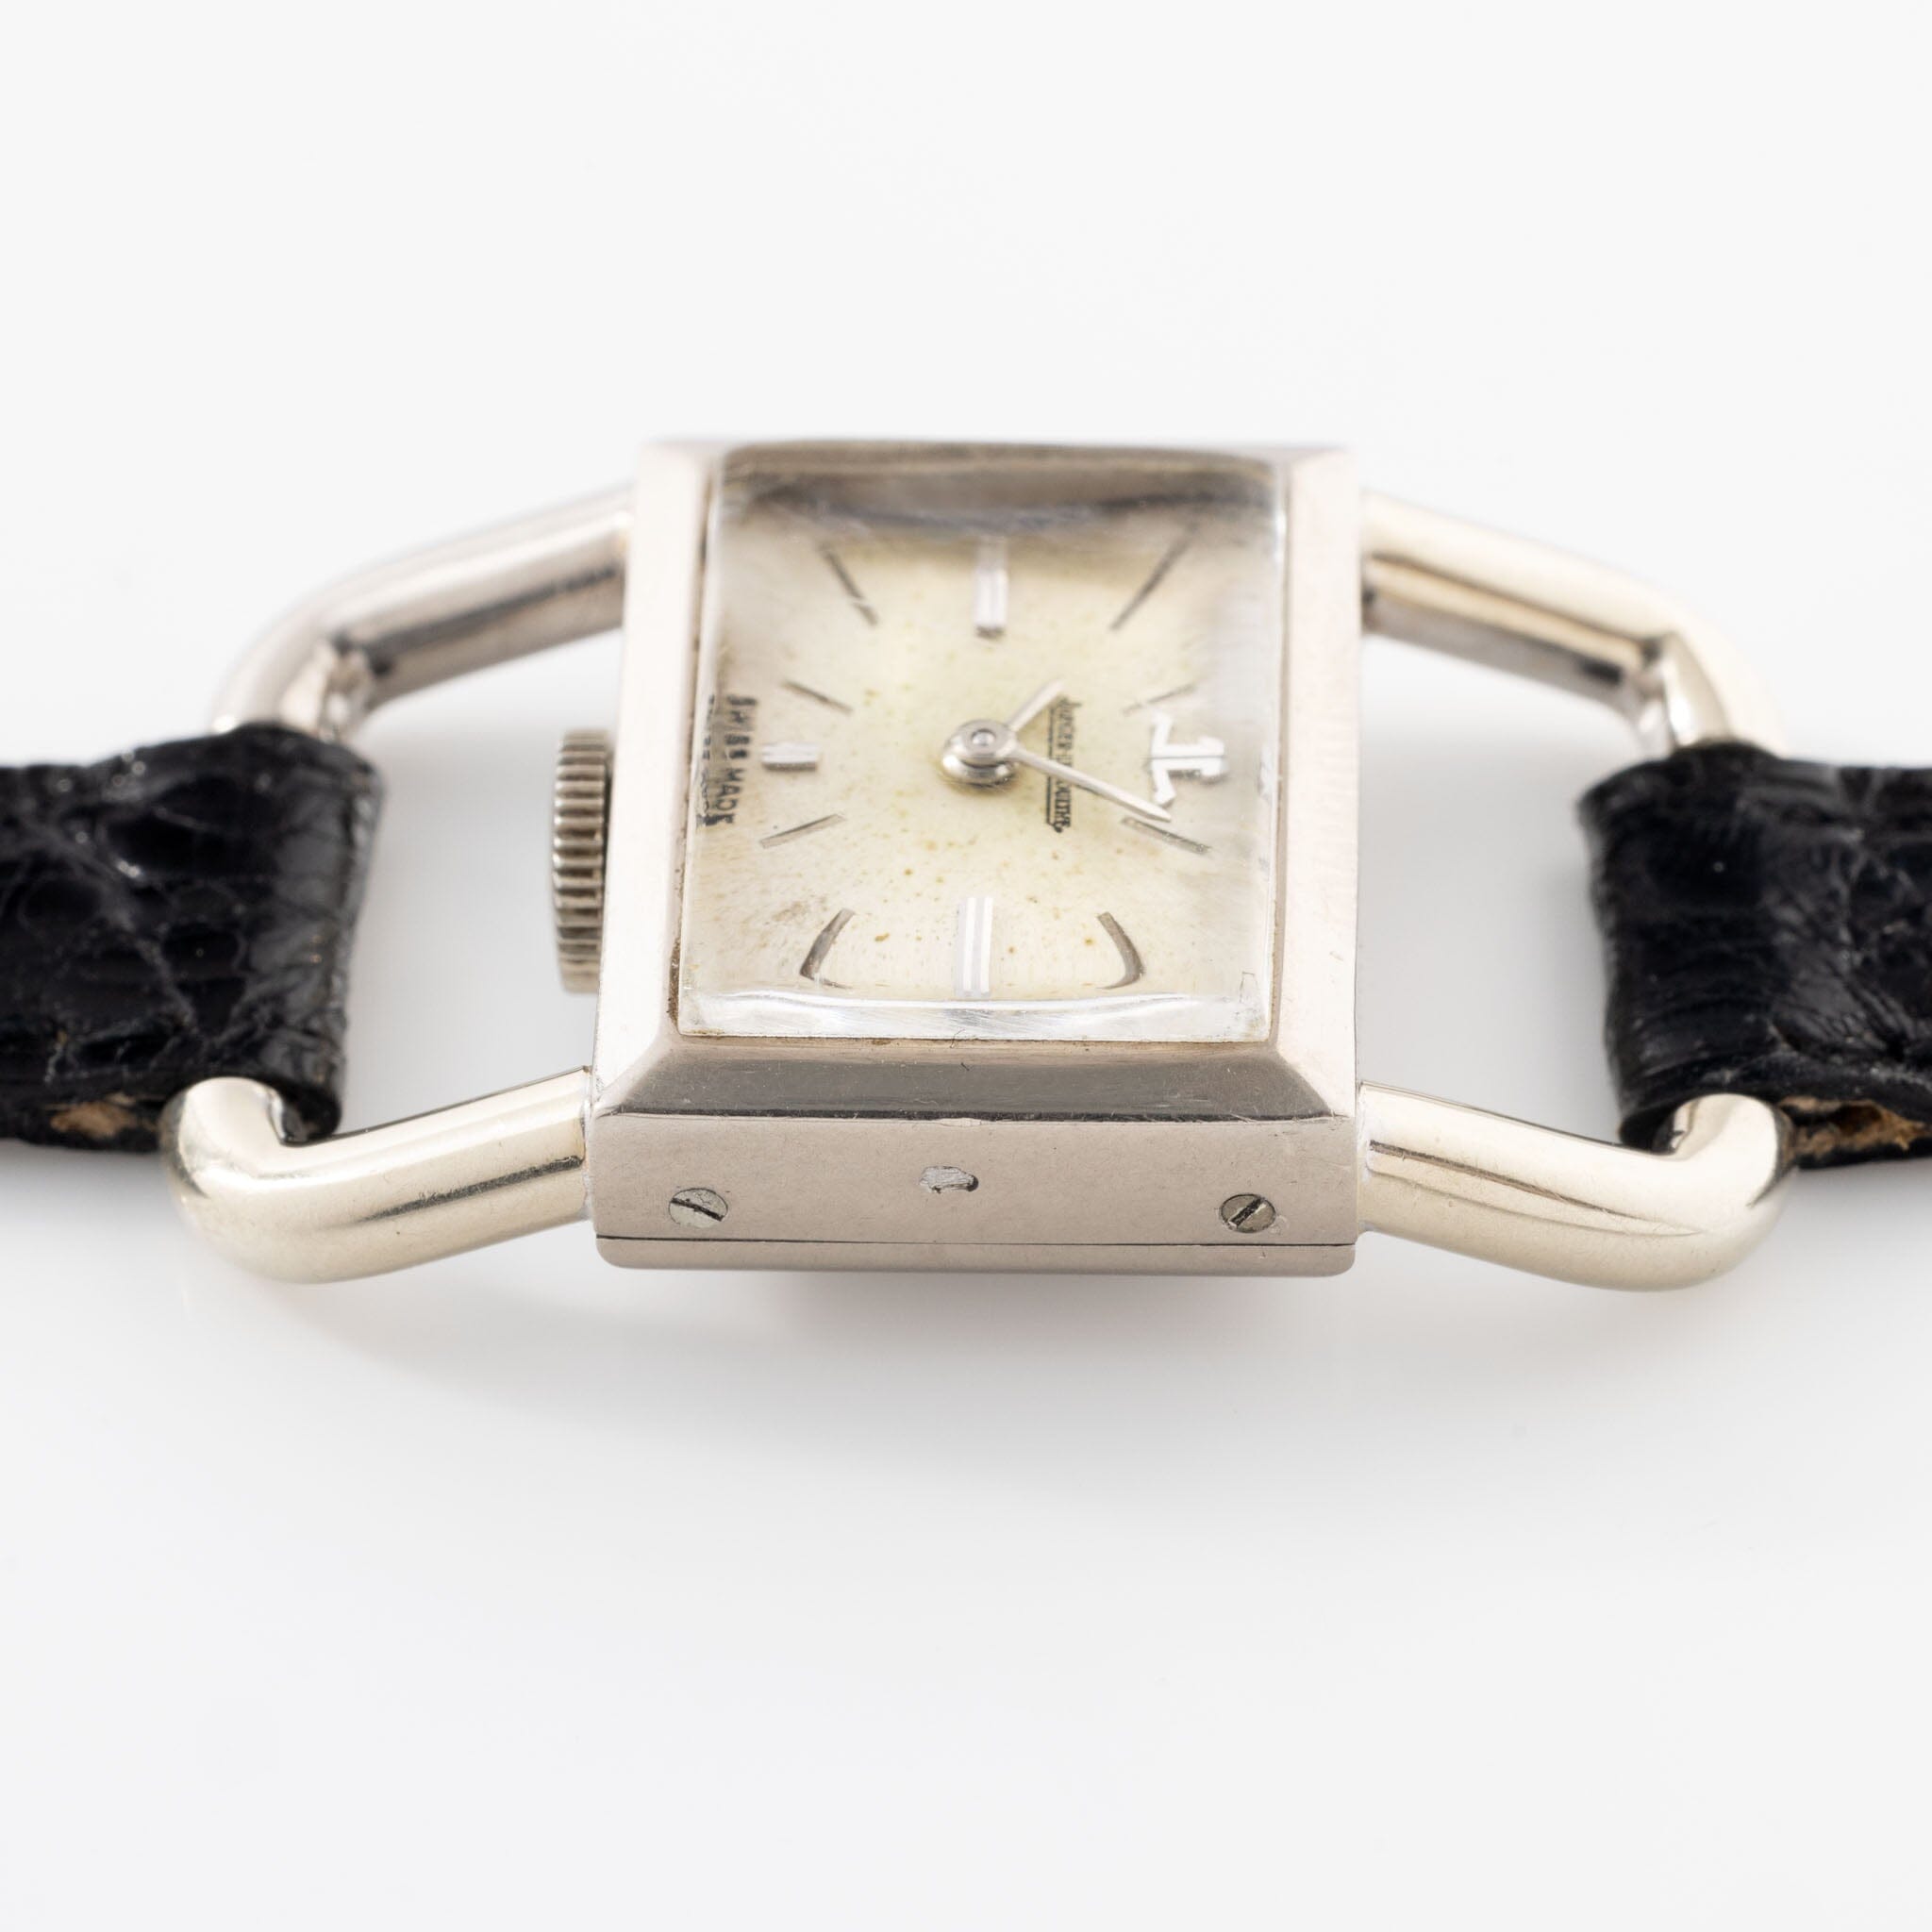 Jaeger LeCoultre for Hèrmes Etrier White Gold Reference 9041 